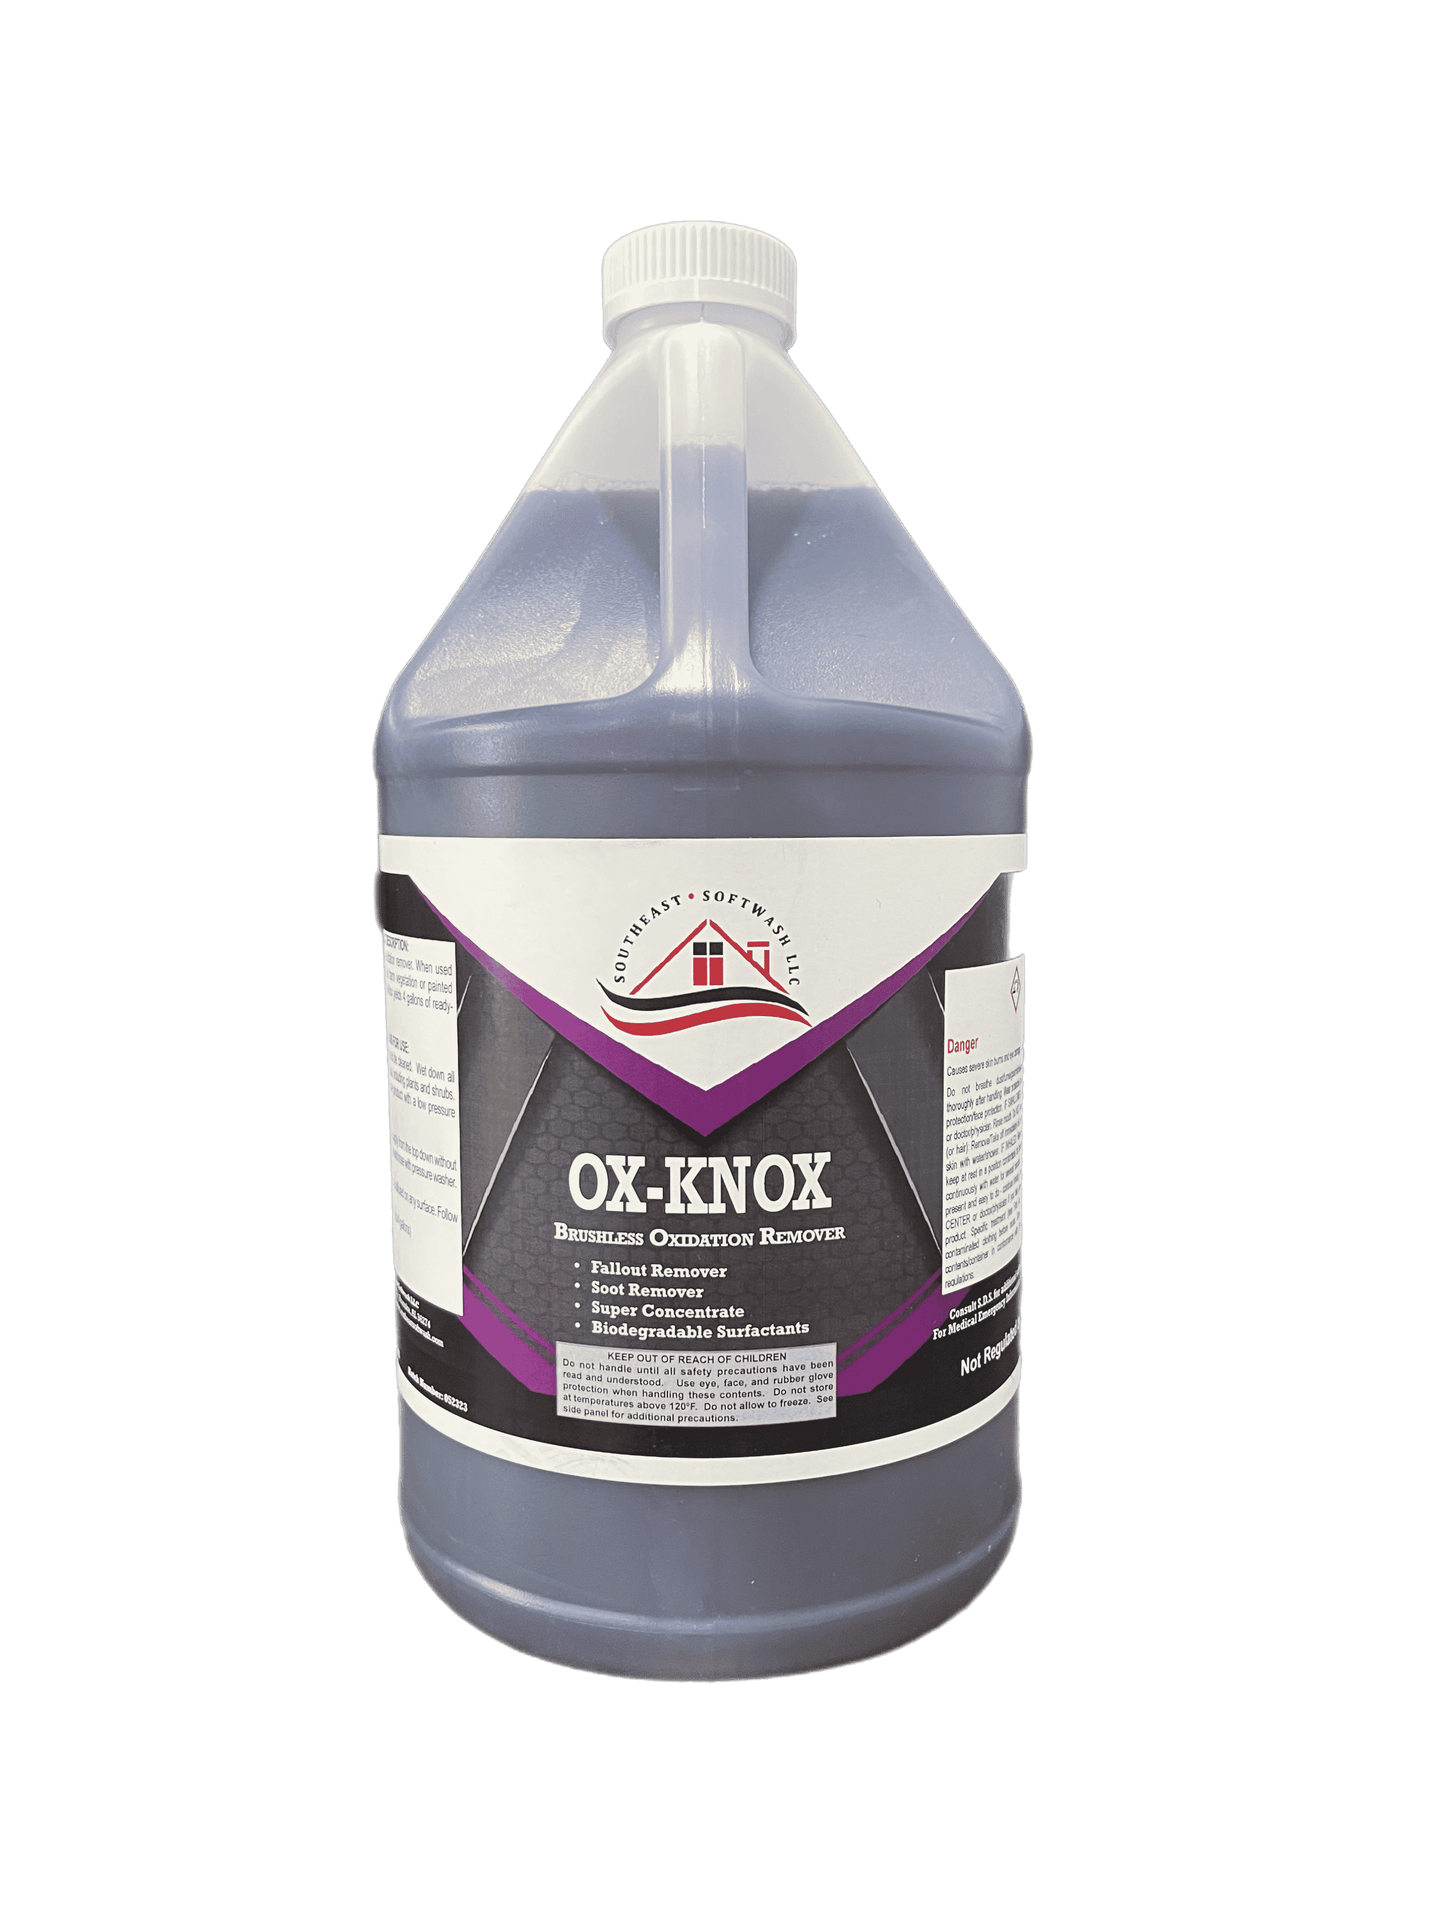 Southeast Softwash 1 gallon jug Ox-Knox Brushless Oxidation Remover